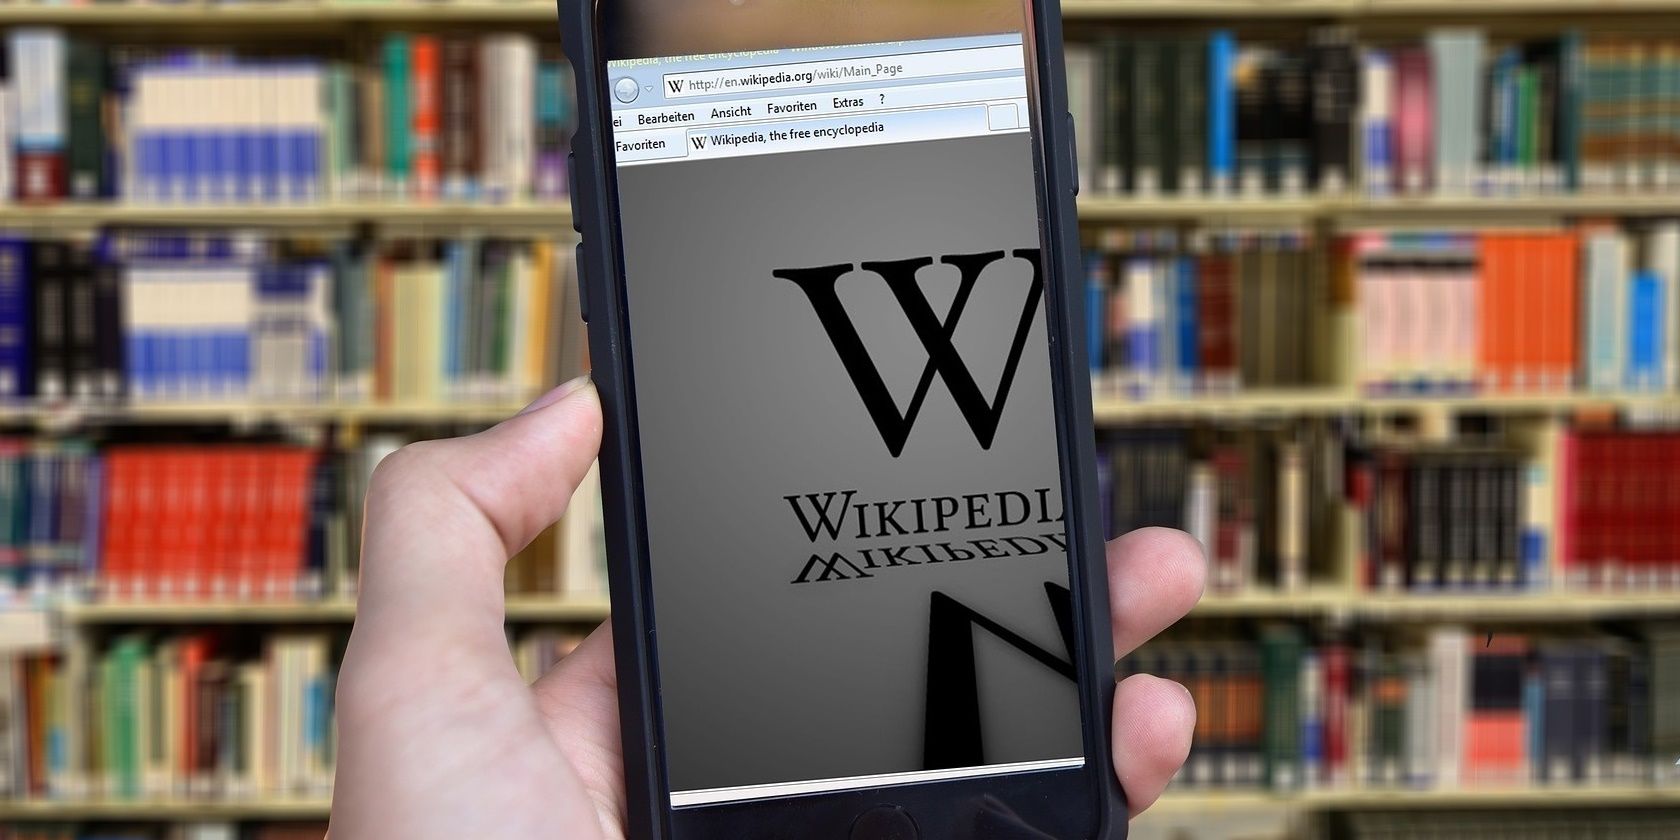 Hand holding phone with Wiki page loaded in front of bookcase